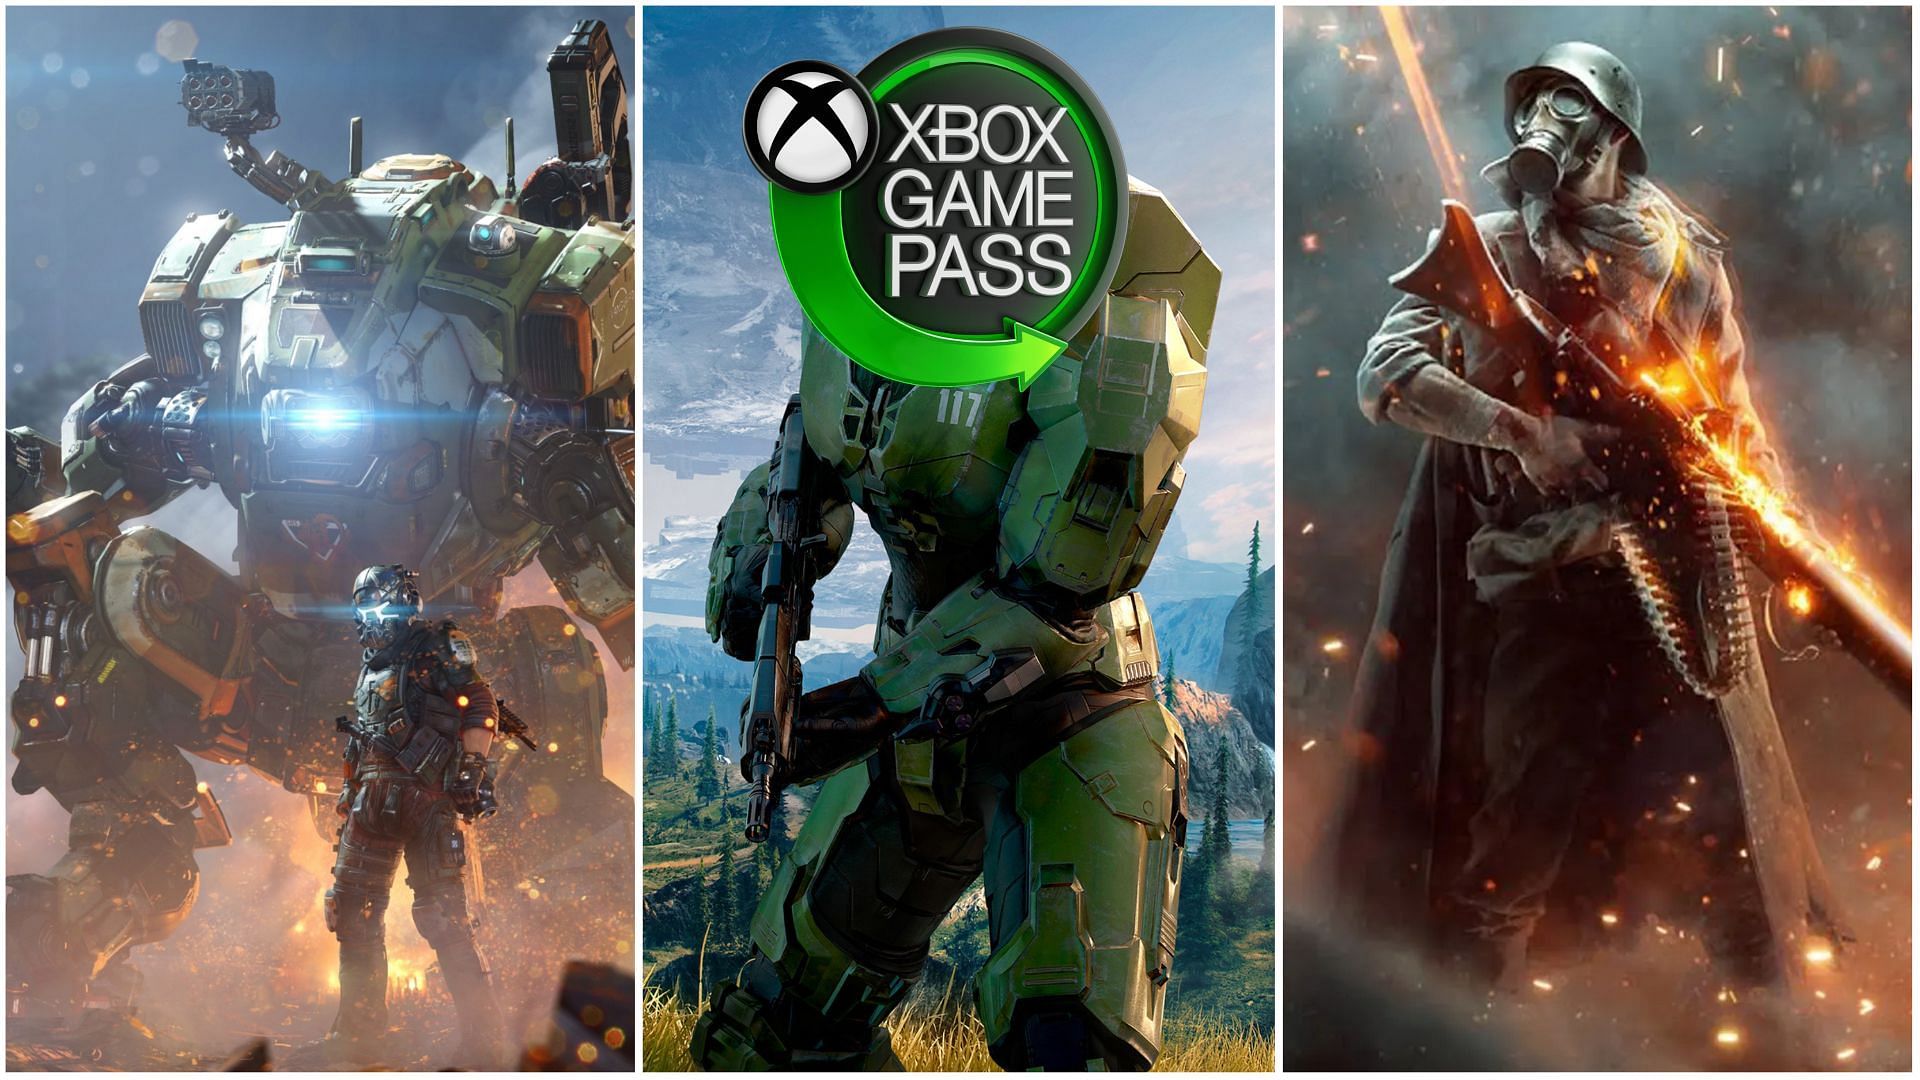 Nationale volkstelling Onderdrukker Minachting 10 best first-person shooter (FPS) games to play on Xbox Game Pass in 2022